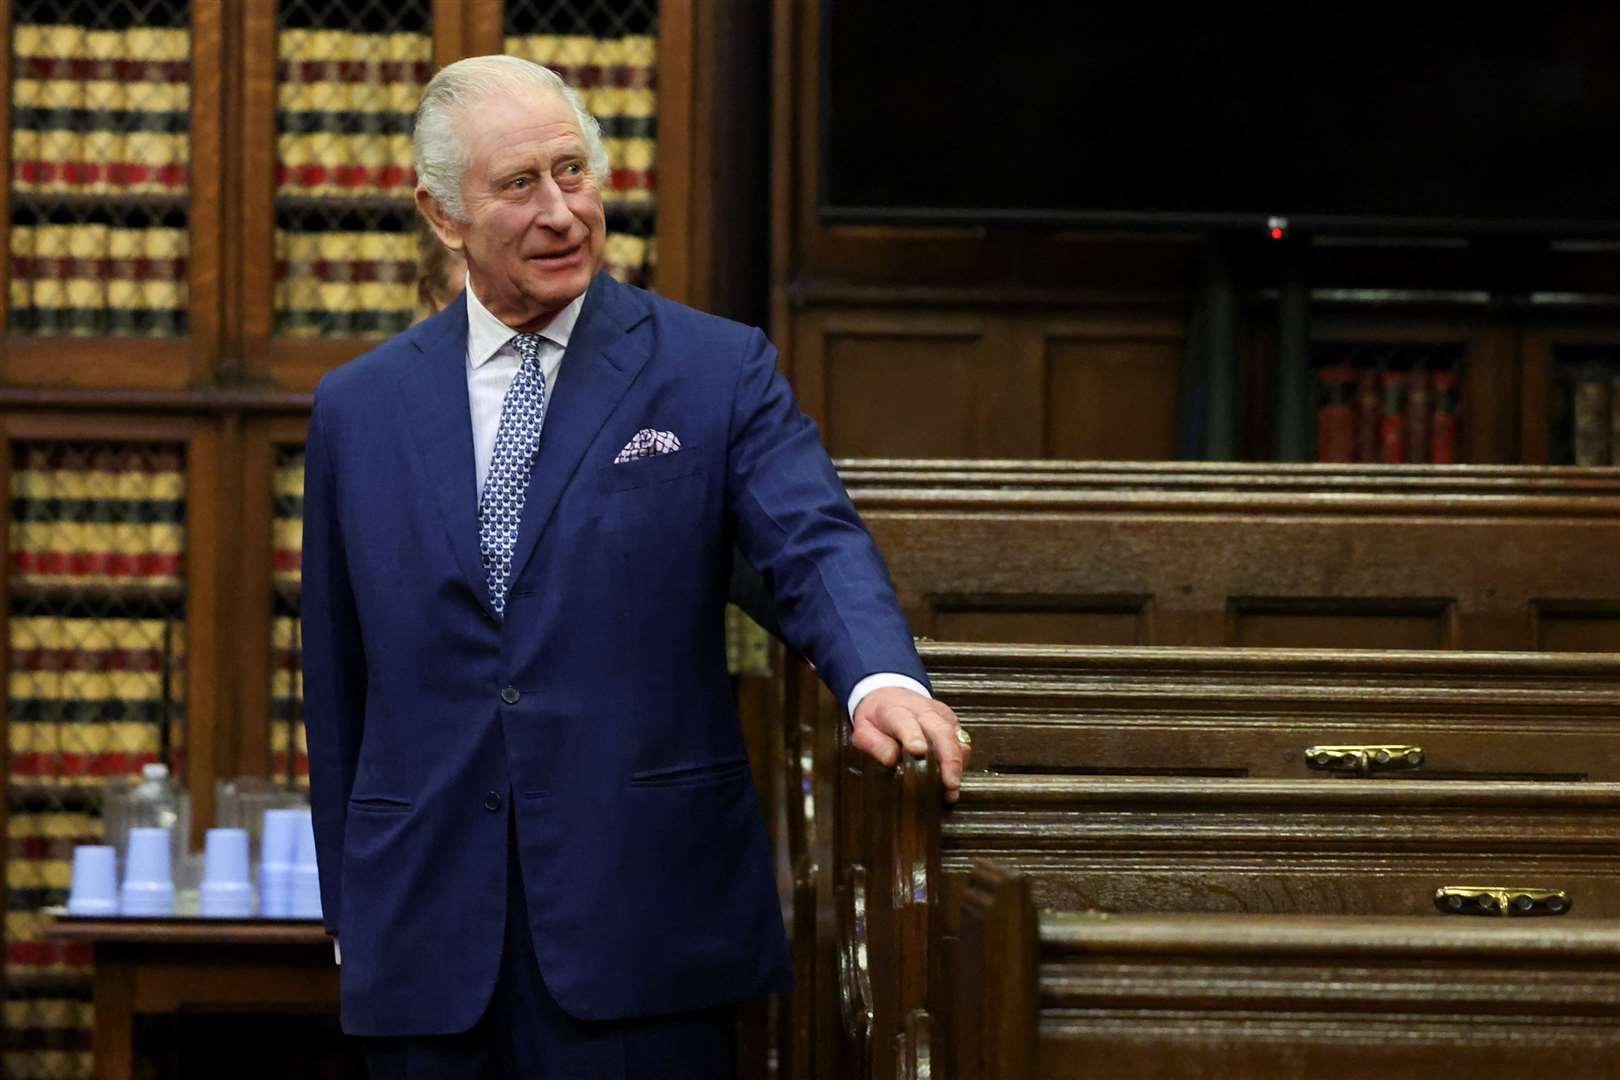 The King during a visit to the Royal Courts of Justice in December (Hannah McKay/PA)